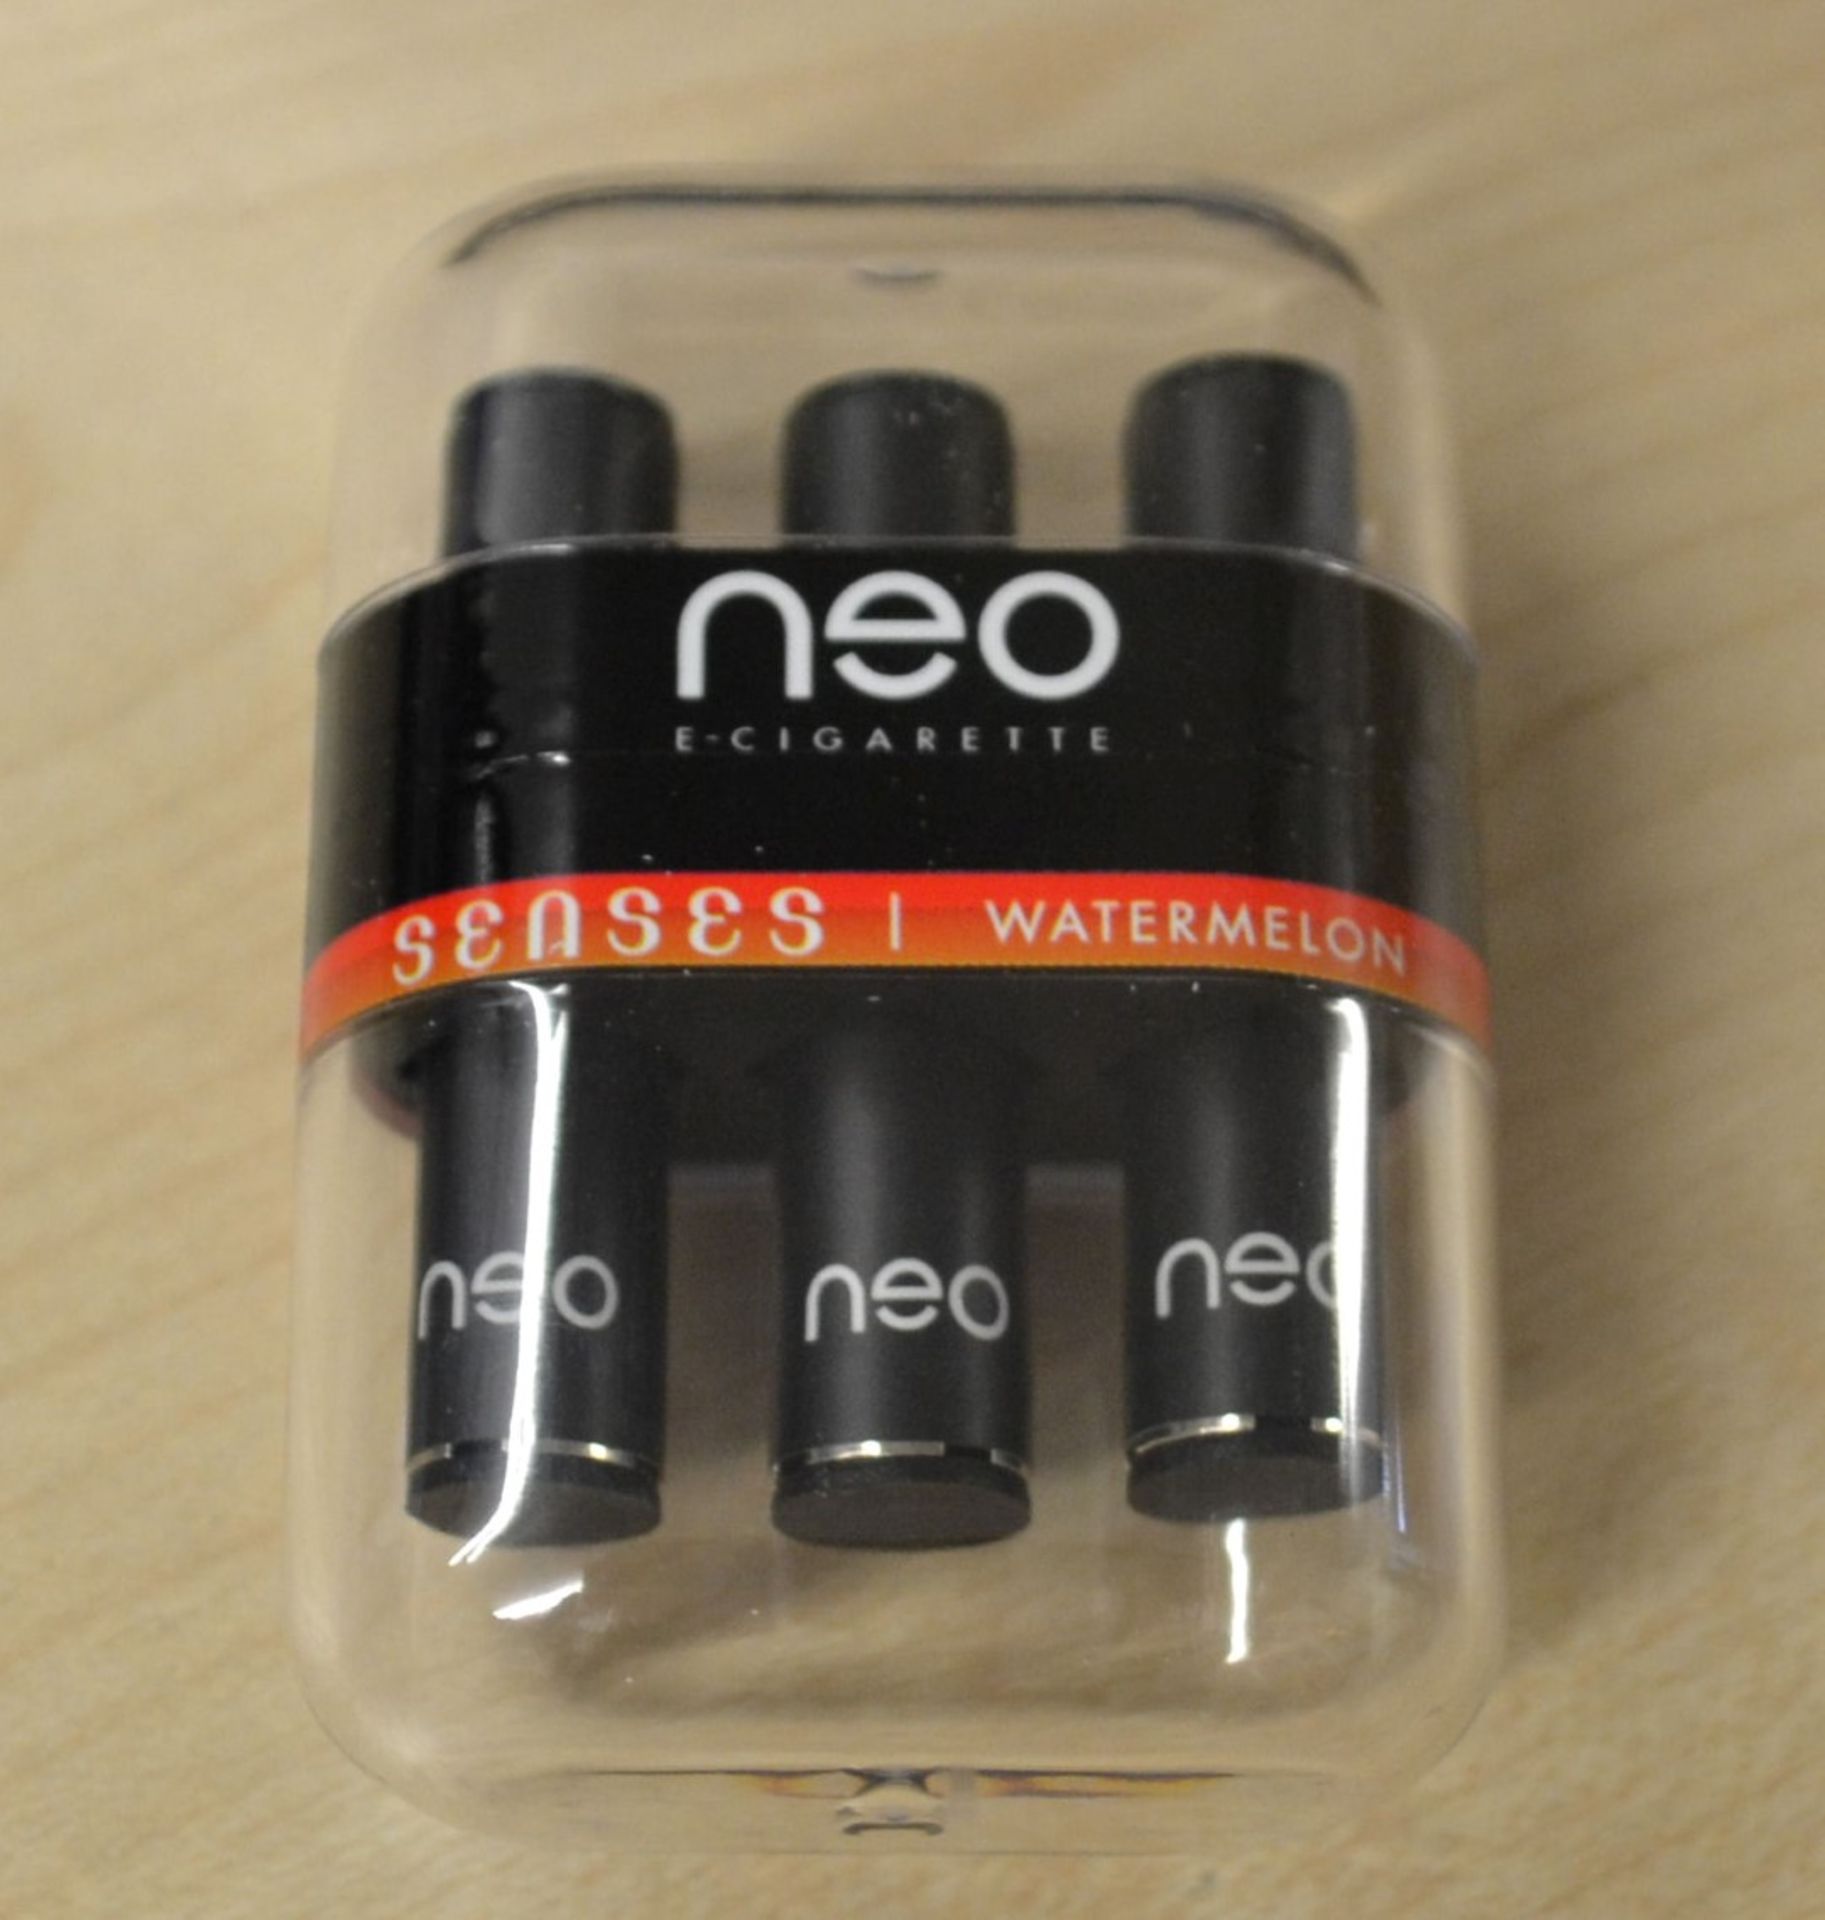 30 x Neo E-Cigarettes Neo Infinity Watermelon Refill Packs - New & Sealed Stock - CL185 - Ref: DRTWM - Image 6 of 9